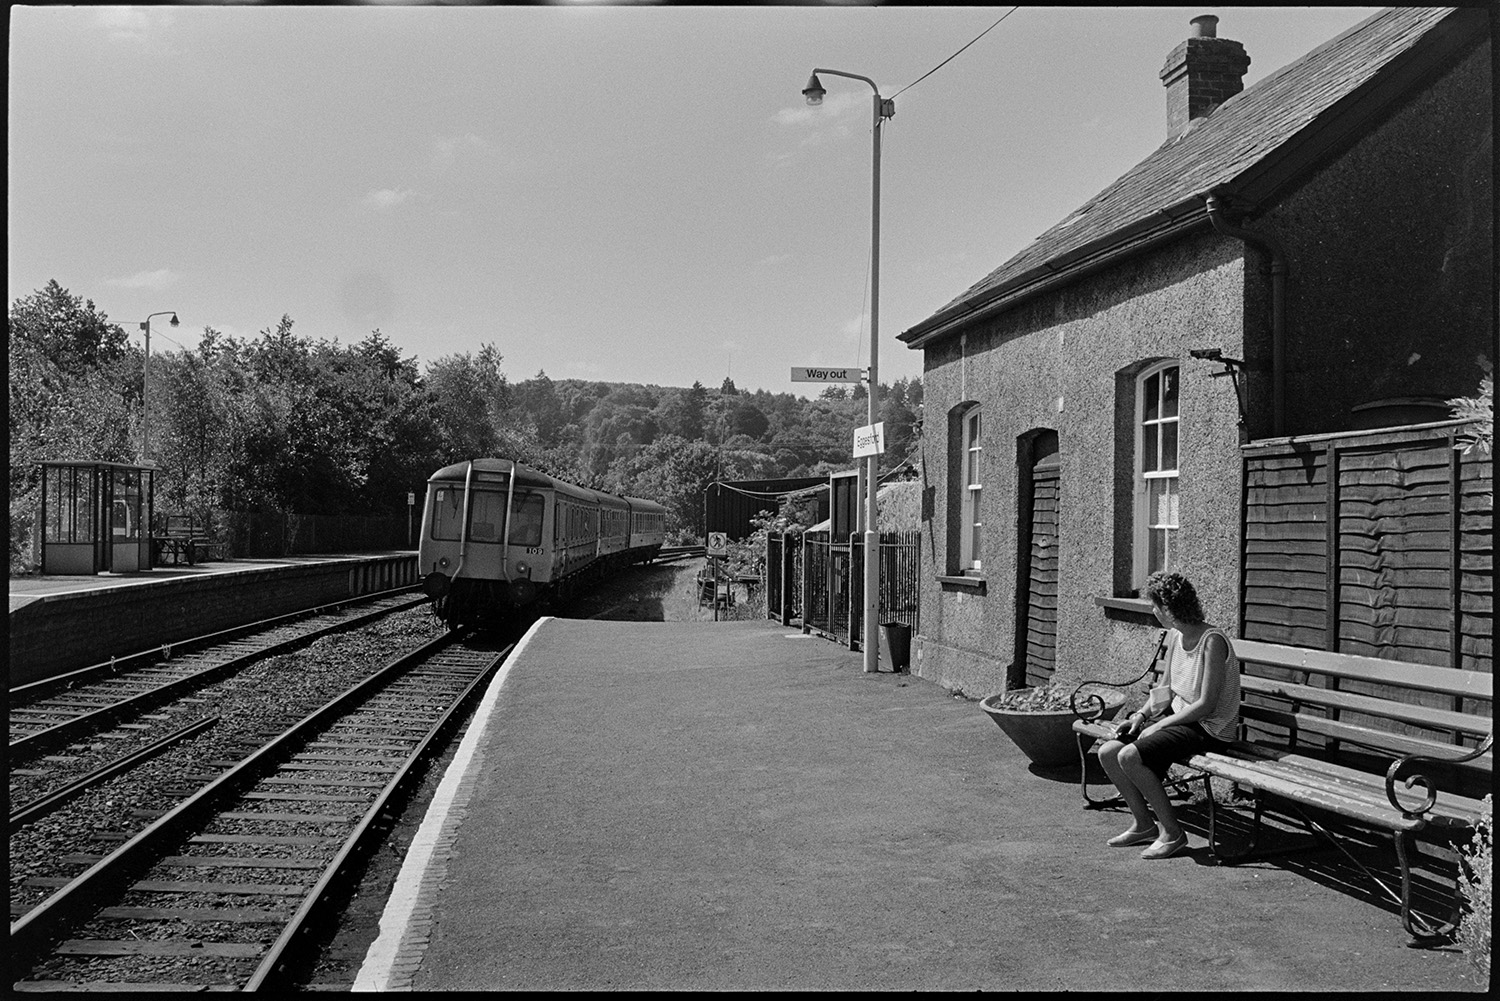 A woman sitting on a bench and watching a diesel train arriving at Eggesford railway station. There is a building on the platform and a waiting shelter on the opposite platform. A wooded landscape is visible in the background.